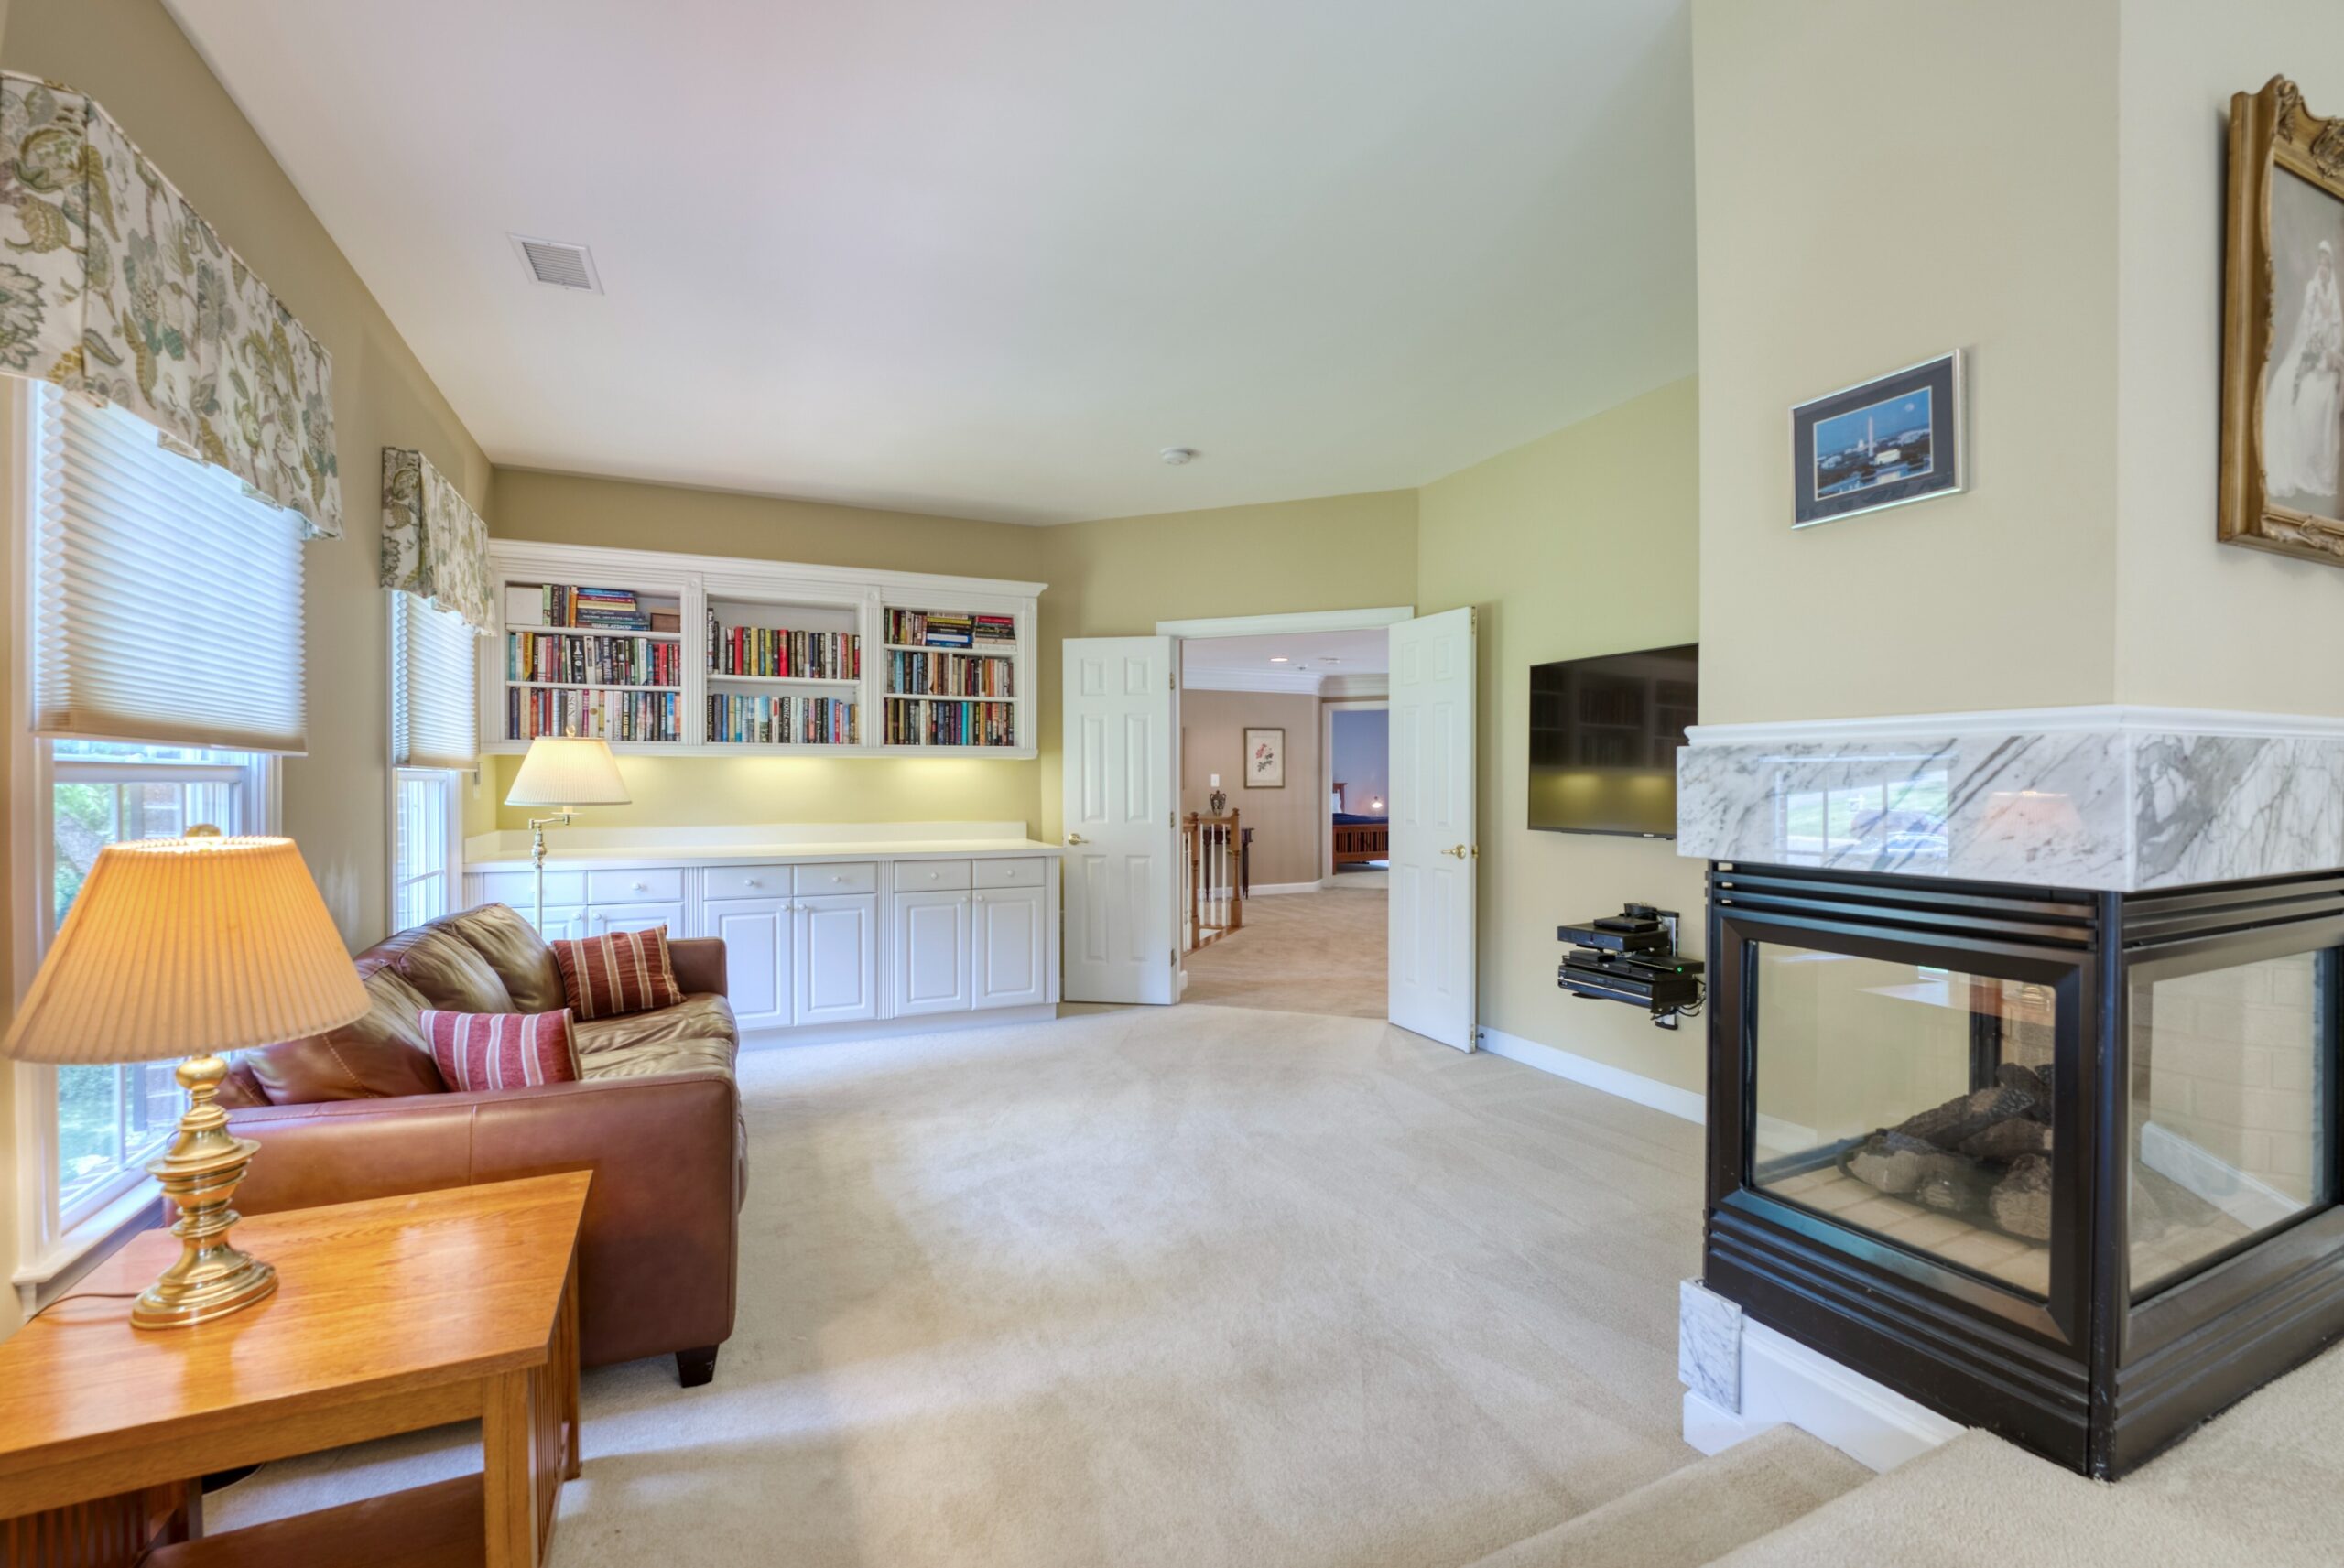 Loft lounge area with built-in bookshelves and cabinets and a gas fireplace. 10703 Ox Croft Ct, Fairfax Station, VA